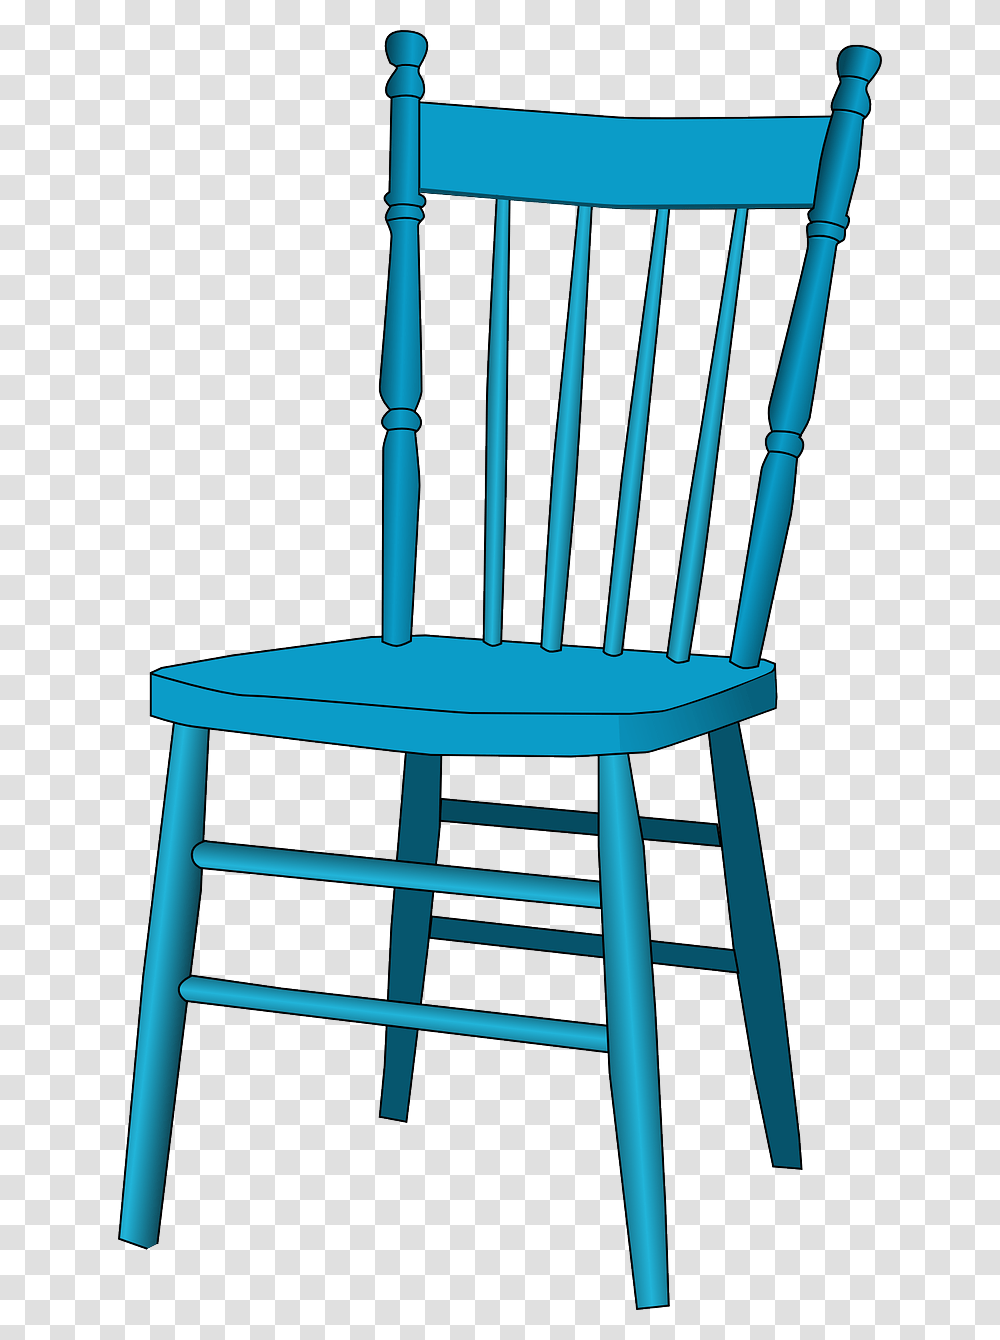 Chair Clipart, Furniture, Rocking Chair Transparent Png